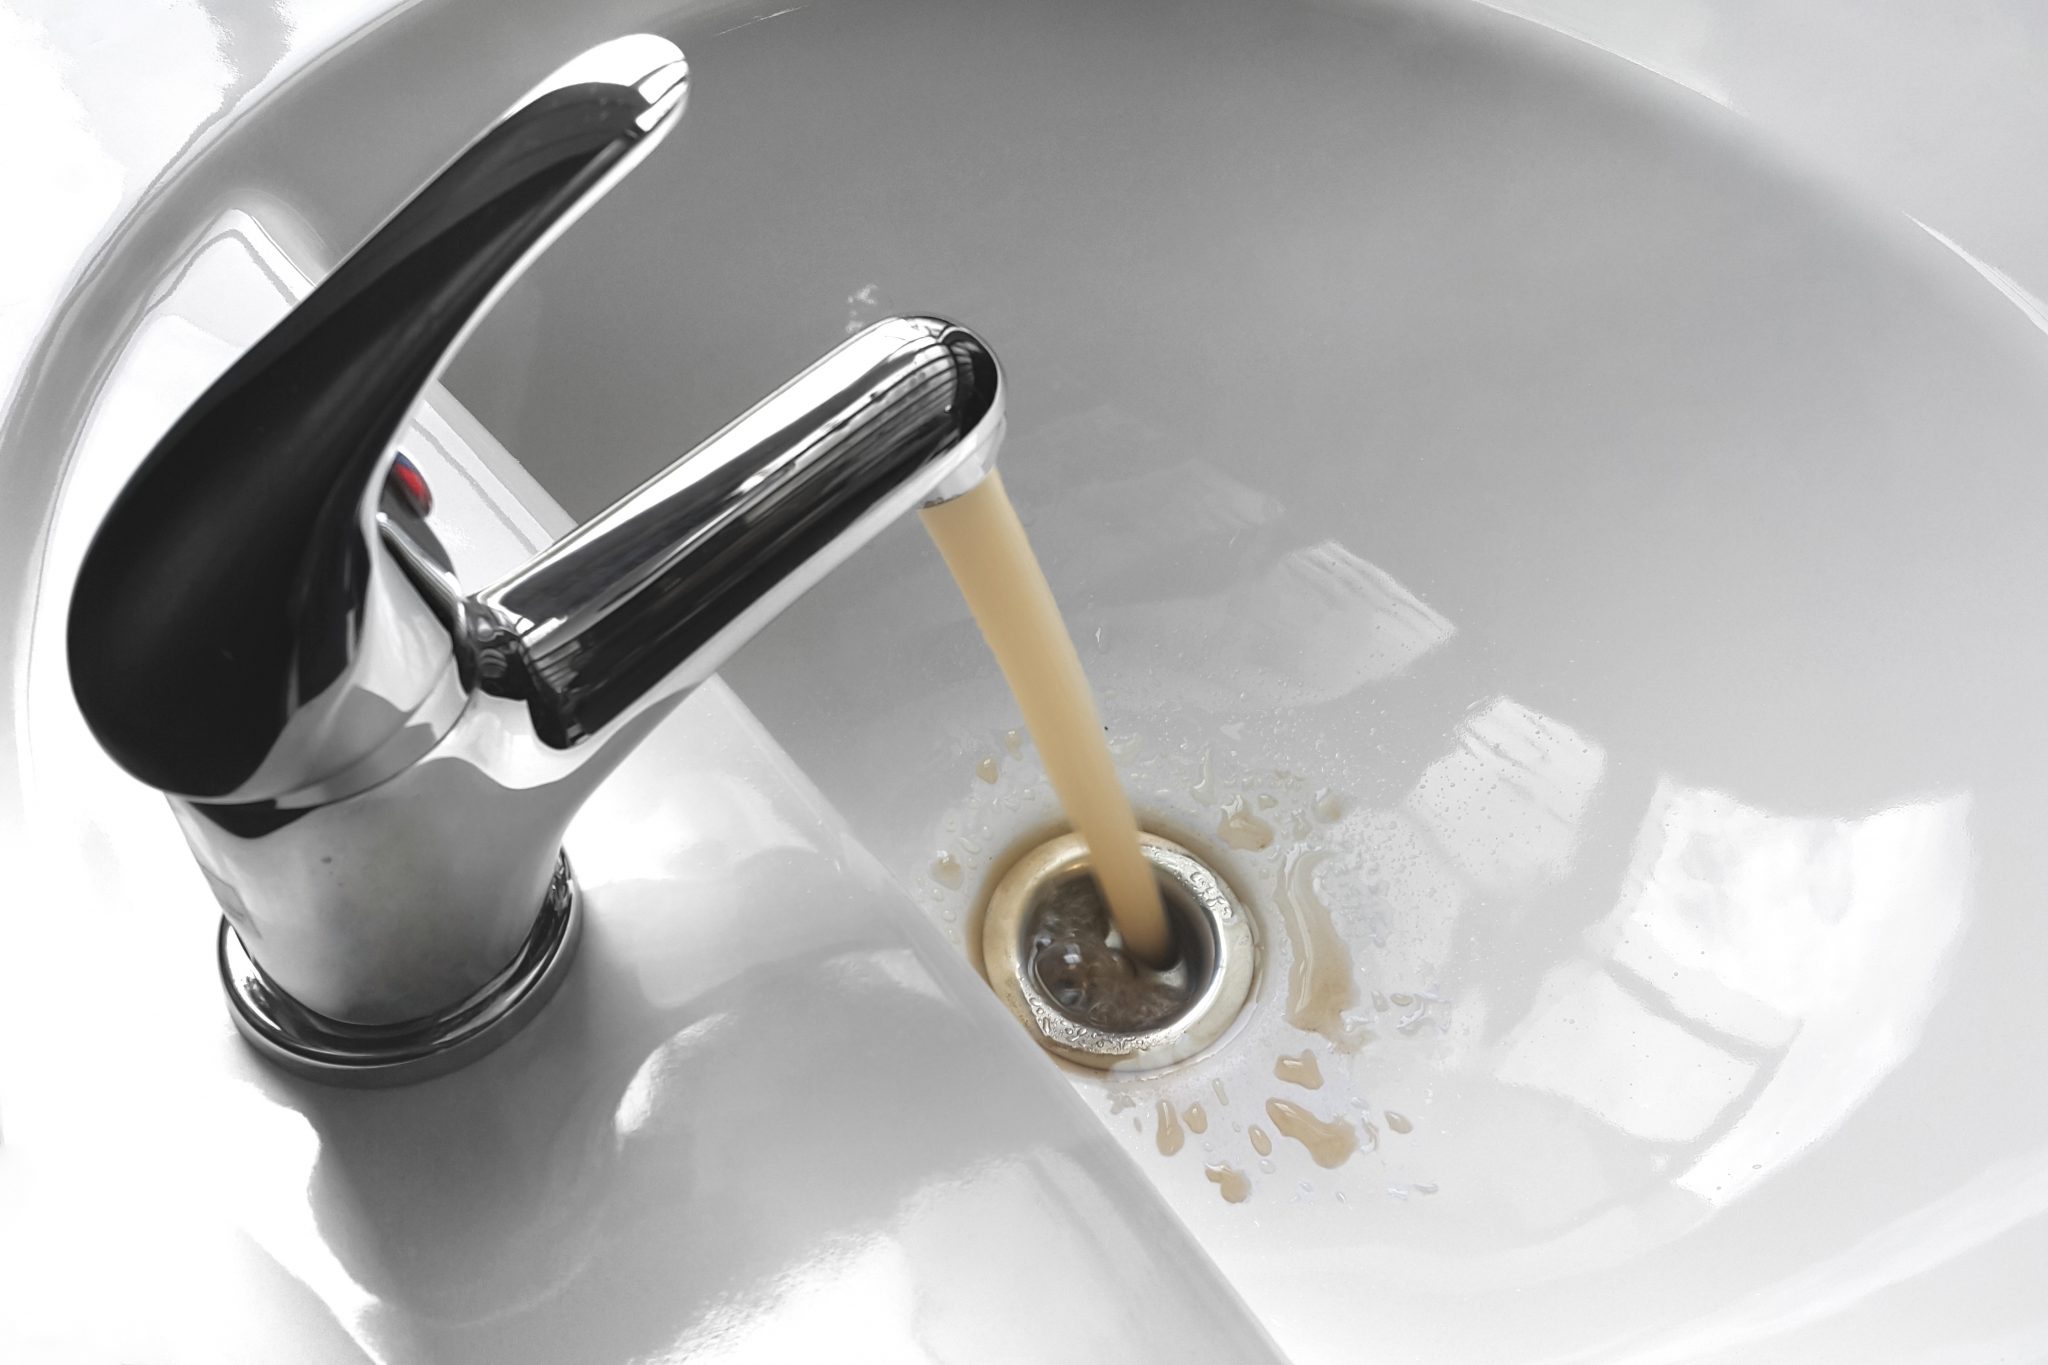 A faucet running with brown water